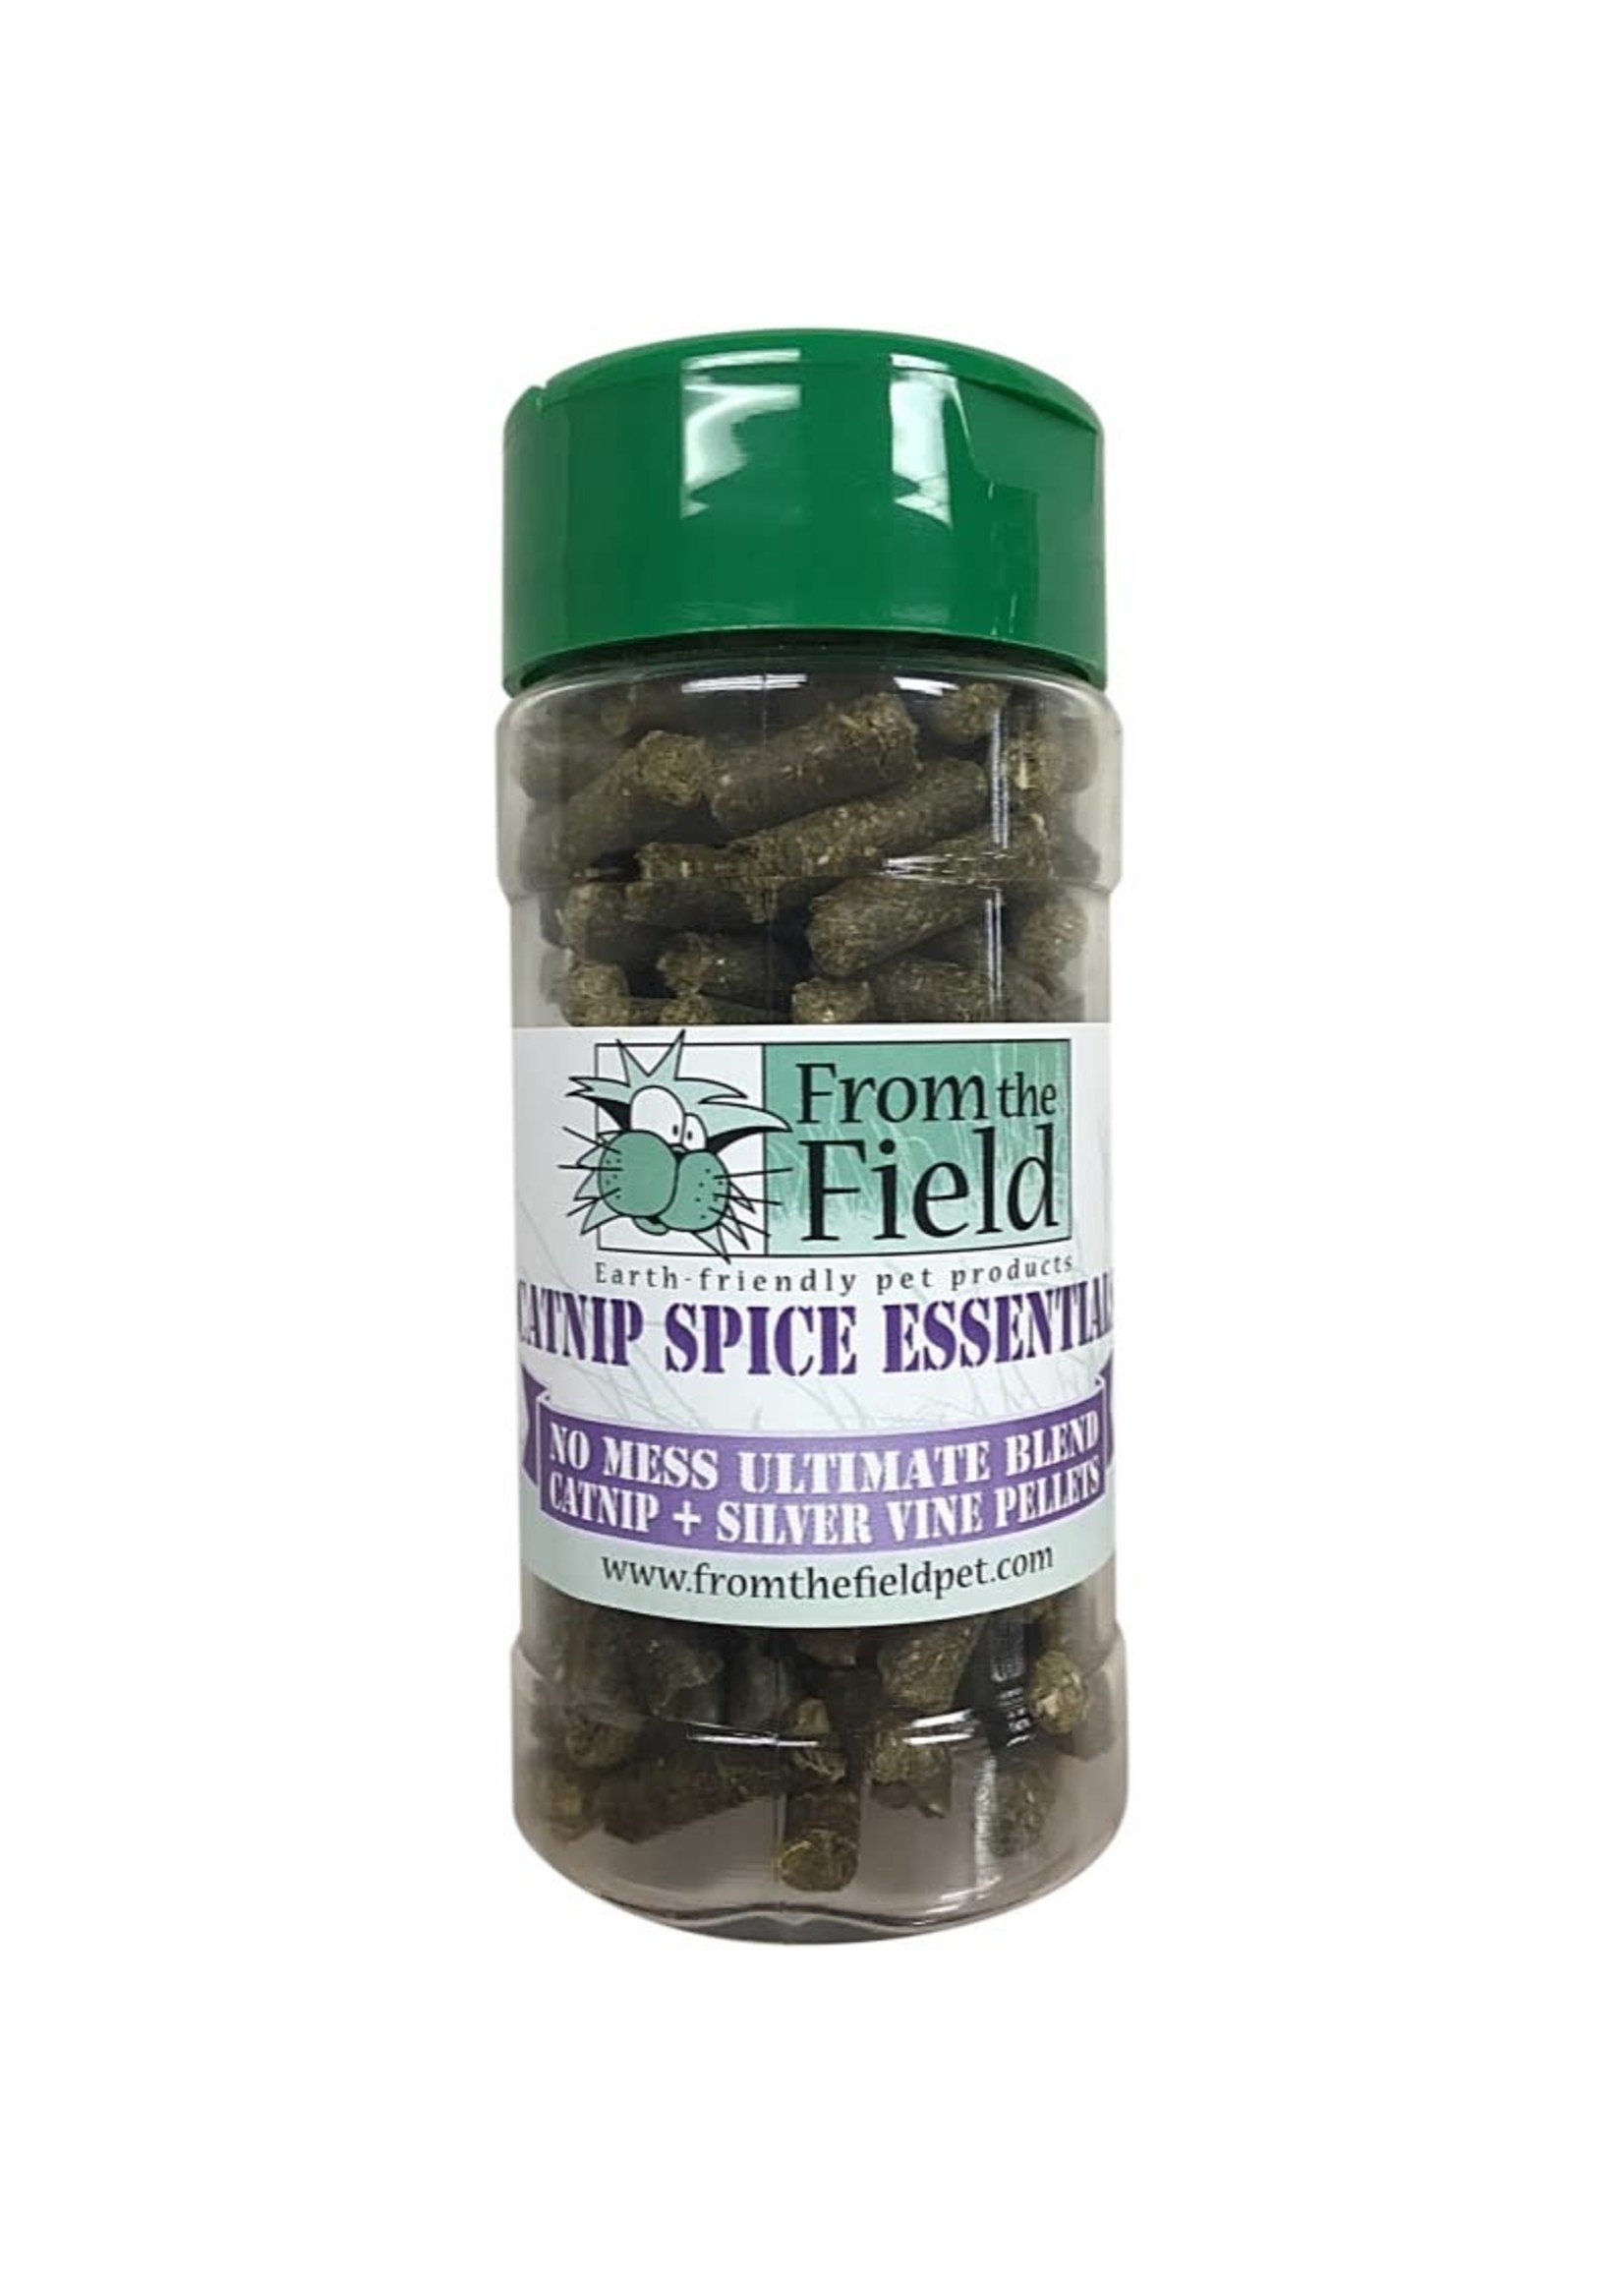 From The Field From the Field Spice Ultimate Blend Pellet